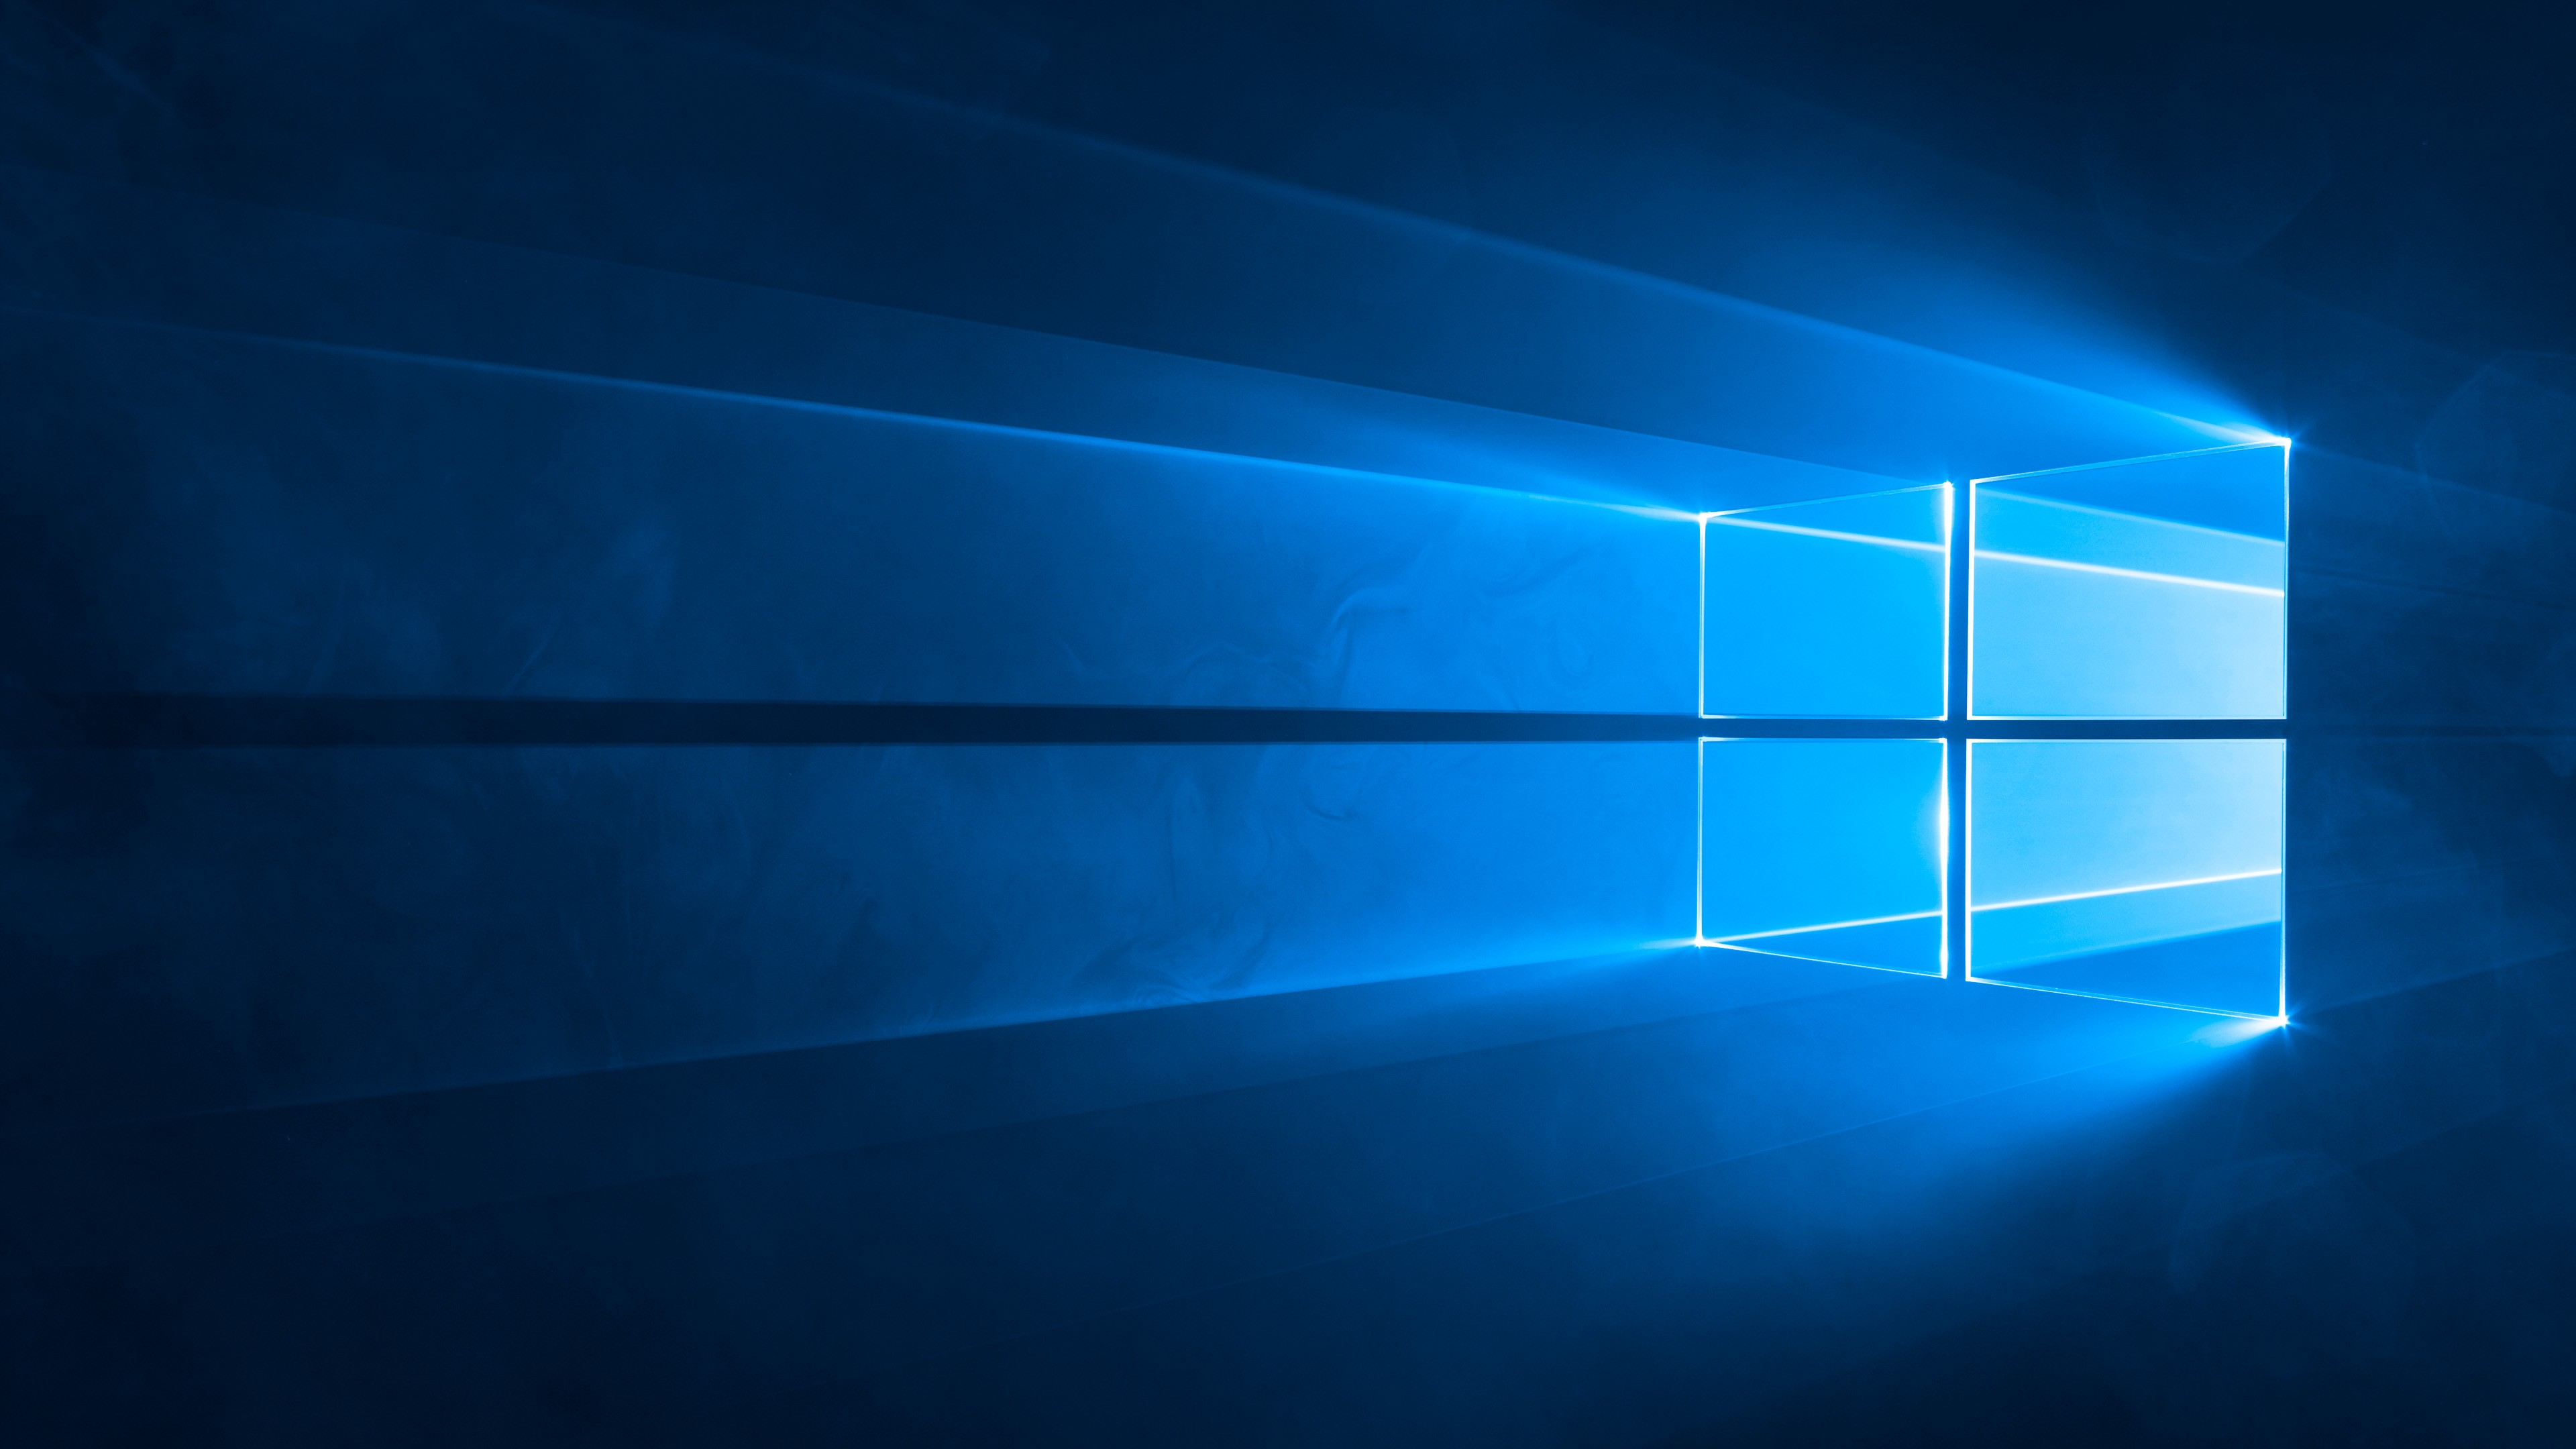 General 3840x2160 operating system abstract Windows 10